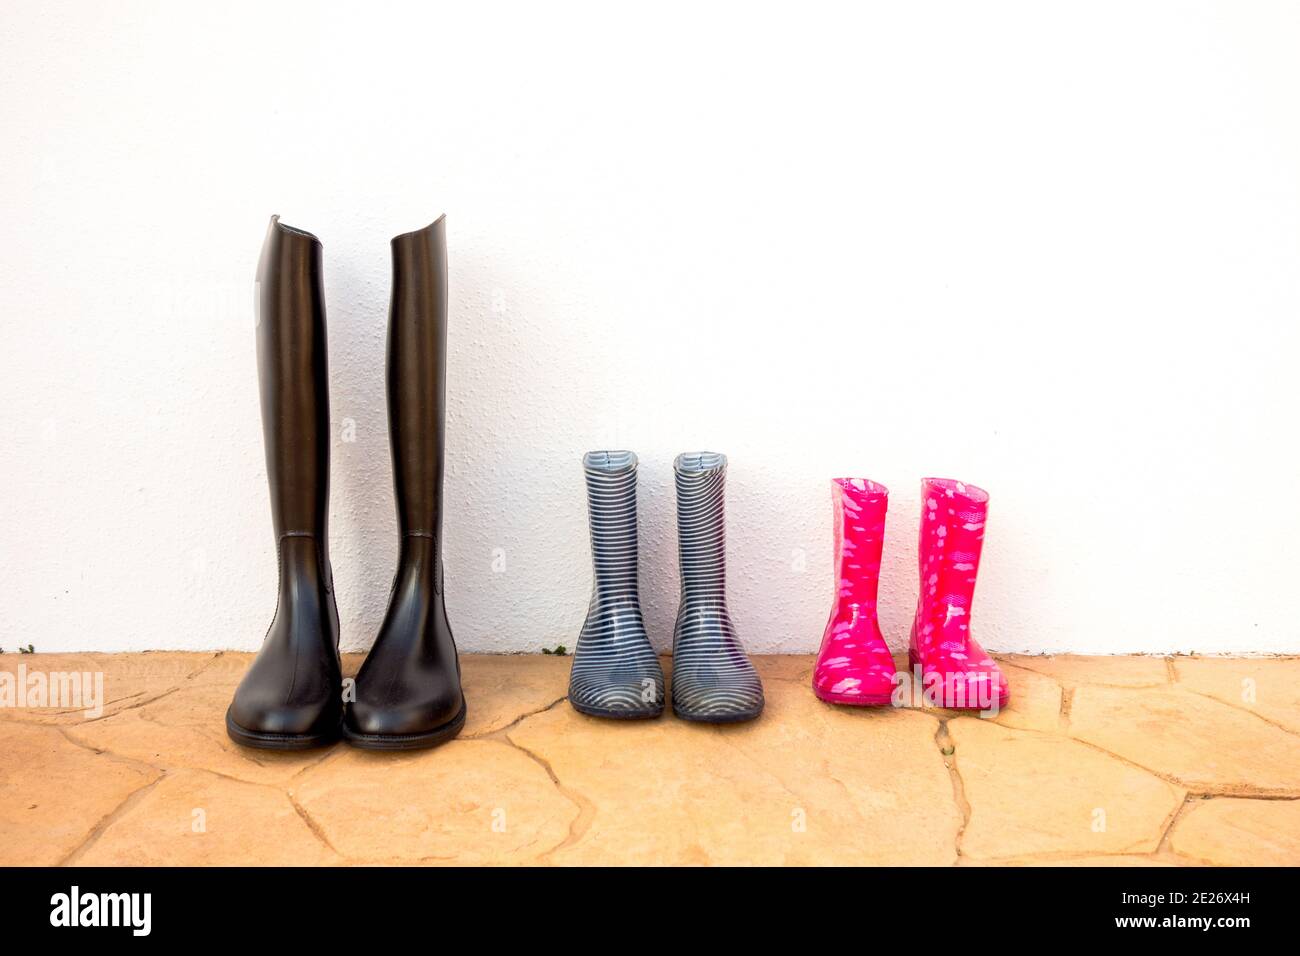 adult and children's water boots, horizontal image, family concept Stock Photo